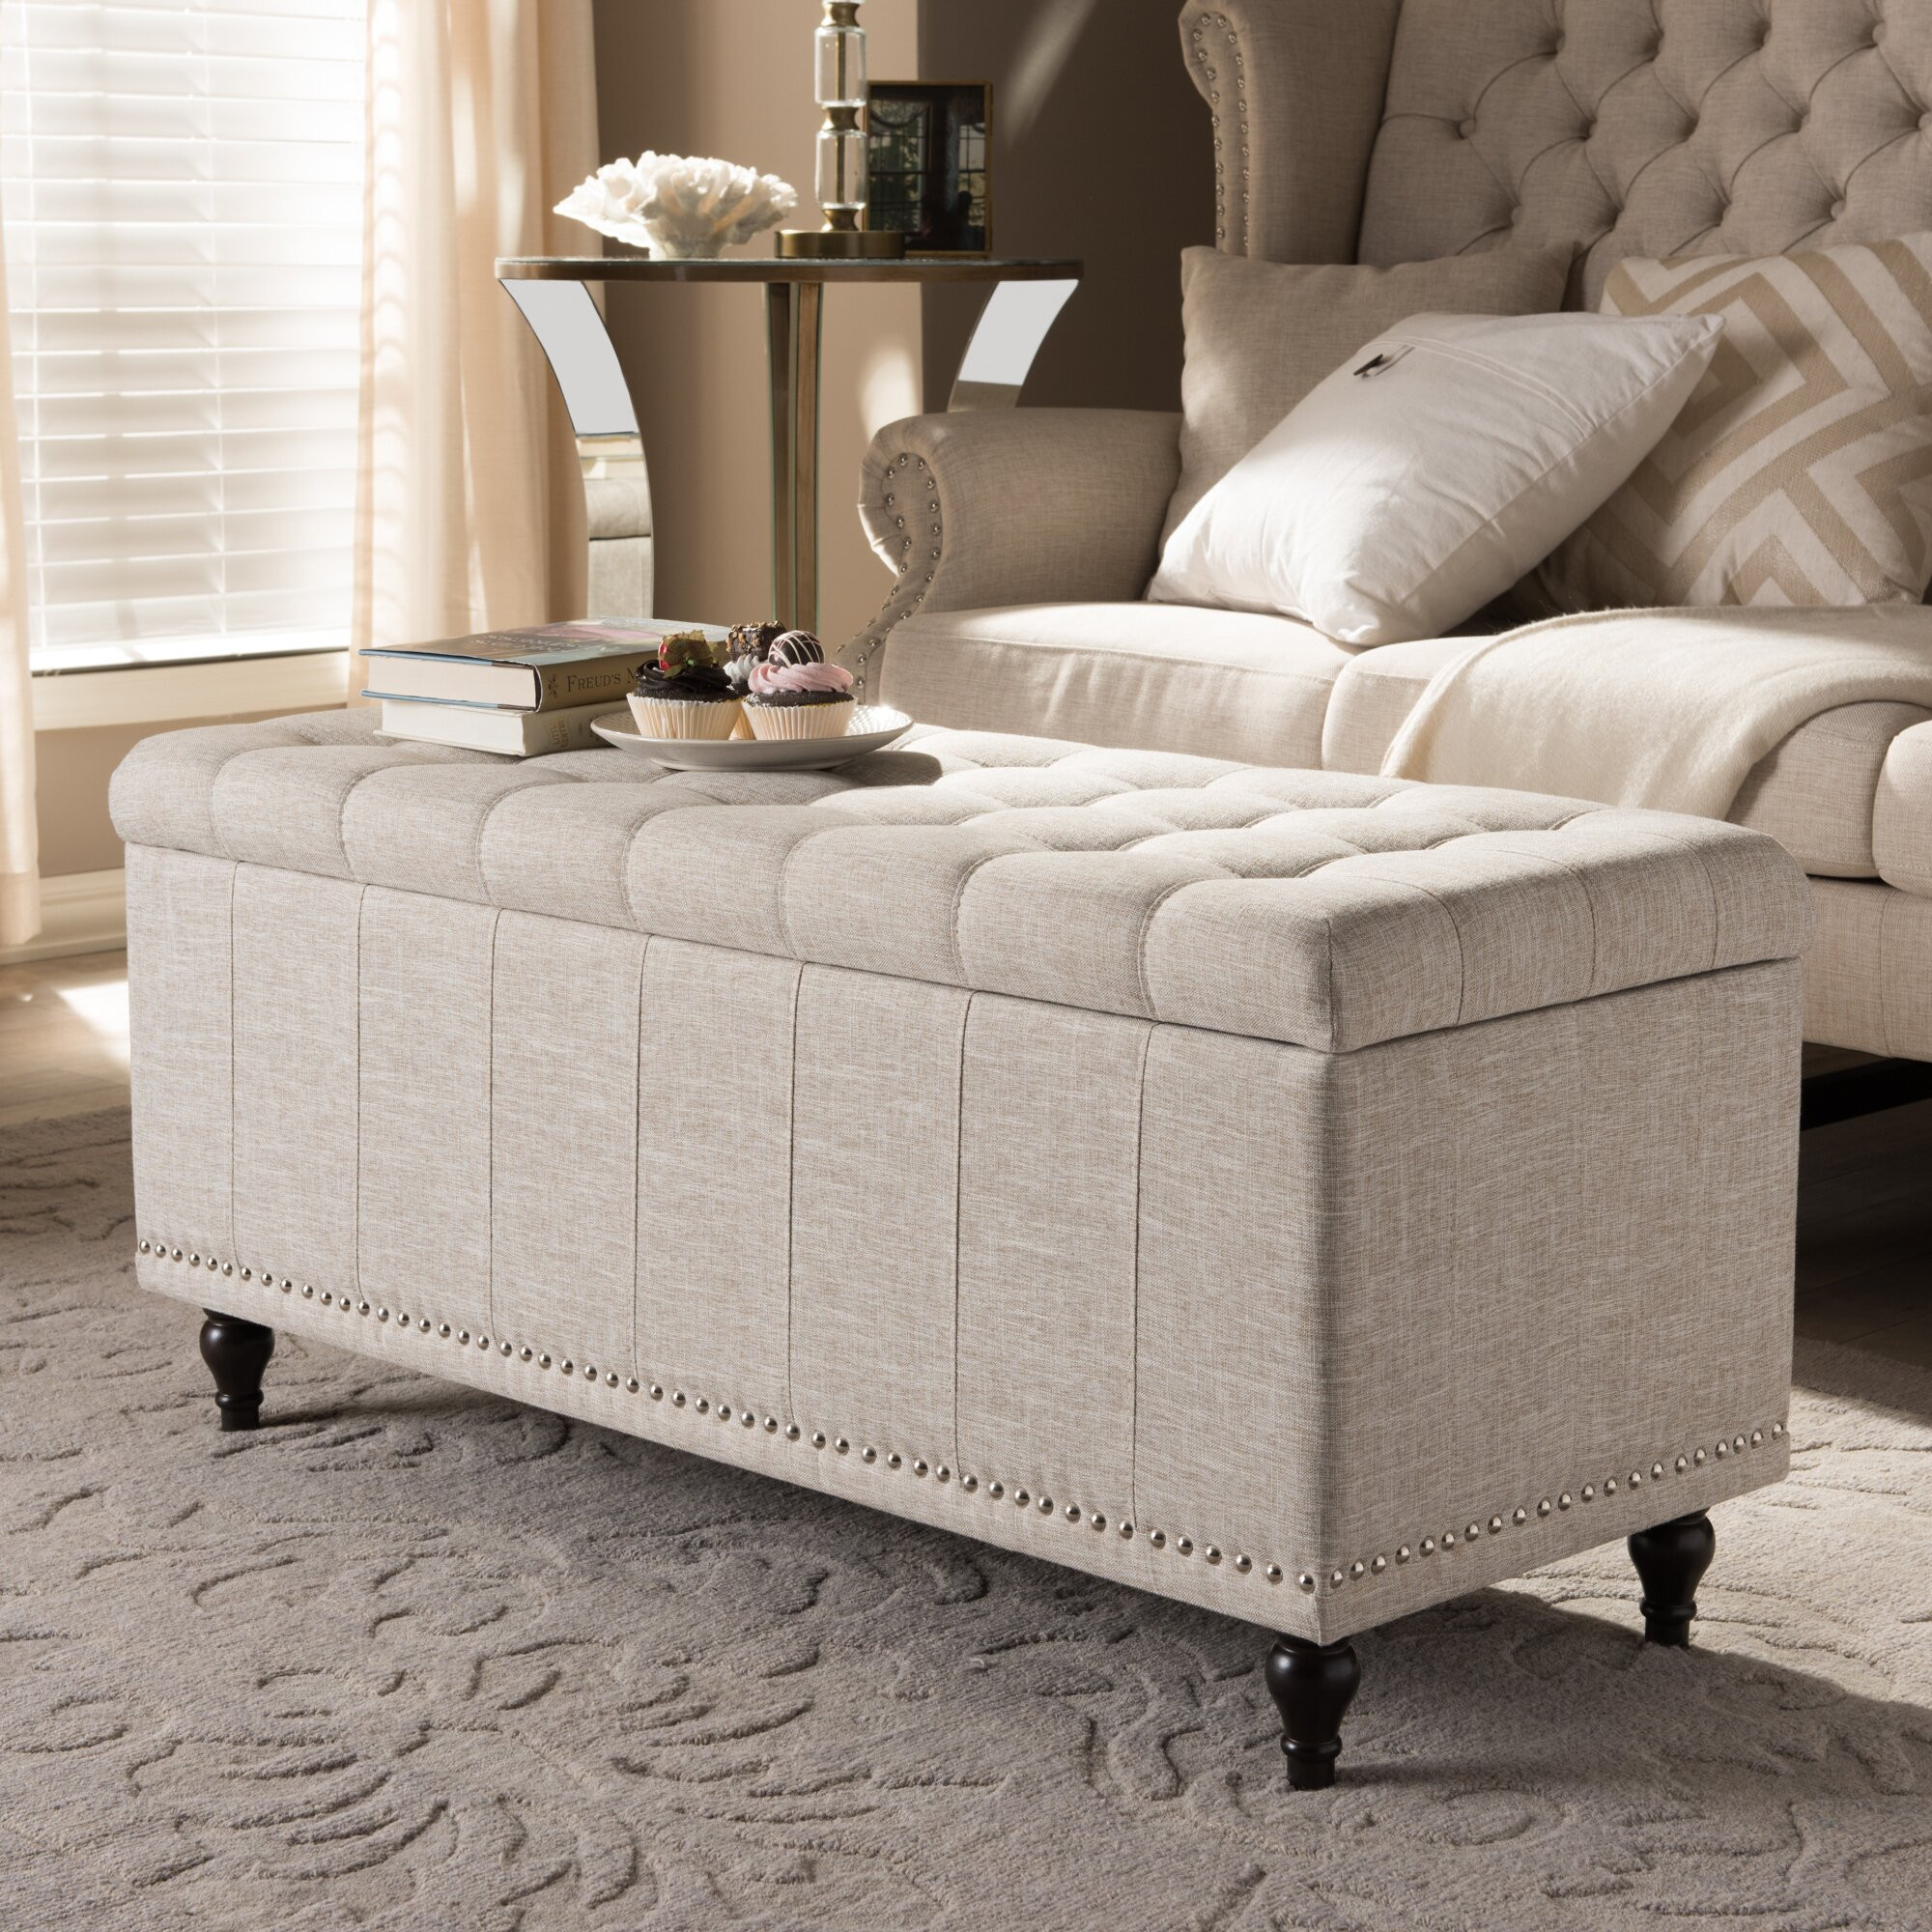 Bench For Bedroom With Storage
 Wholesale Interiors Baxton Studio Luca Upholstered Storage